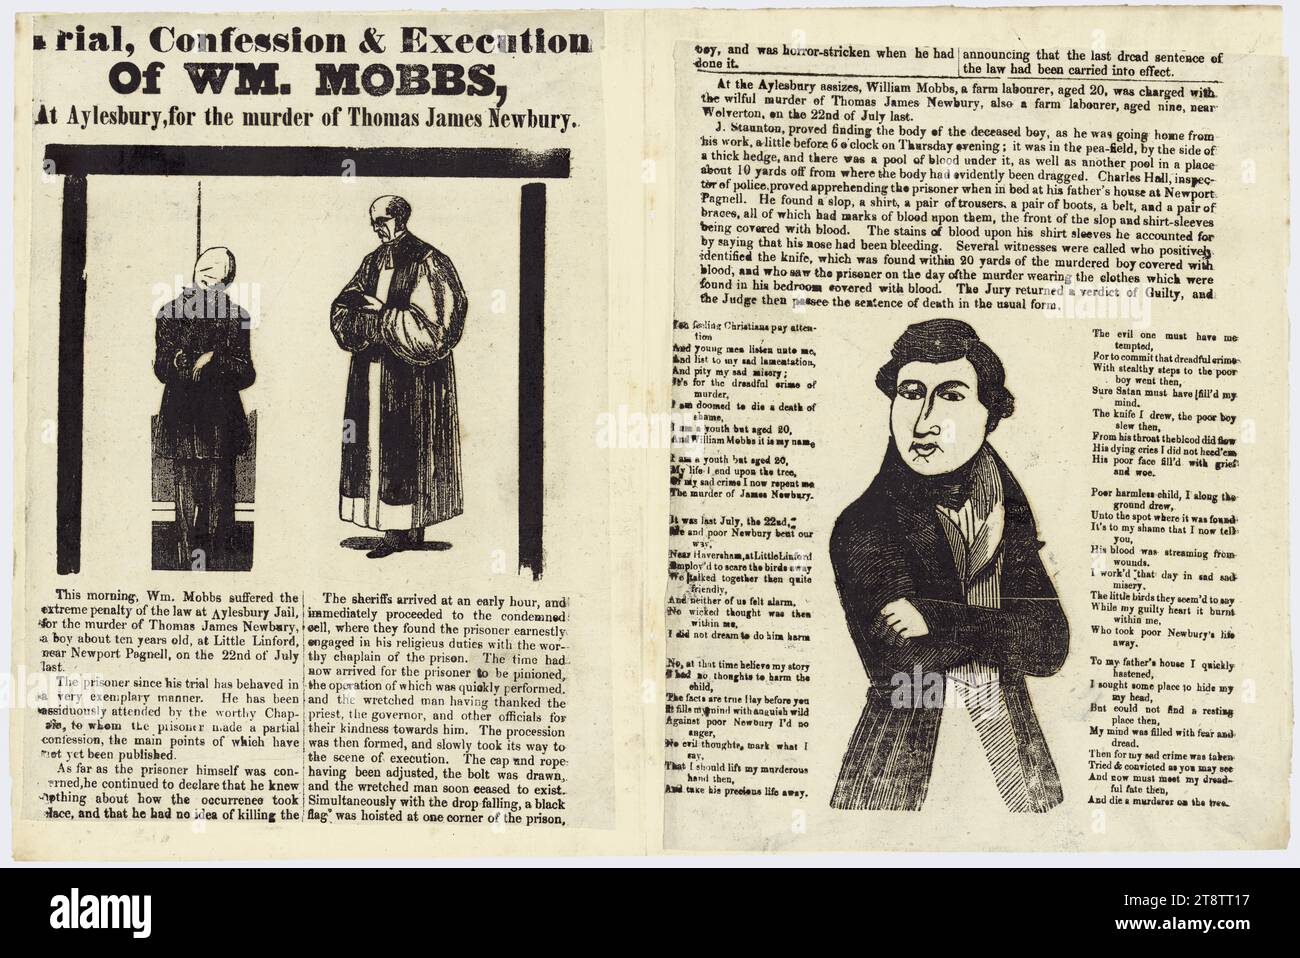 Trial, confession & execution of Wm Mobbs, at Aylesbury, for the murder of Thomas James Newbury. 1870, An arrangement of text, with two illustrations: the first of a man hanging on gallows beside a priest, and the other a picture of a young man in jacket, waistcoat and cravat Stock Photo